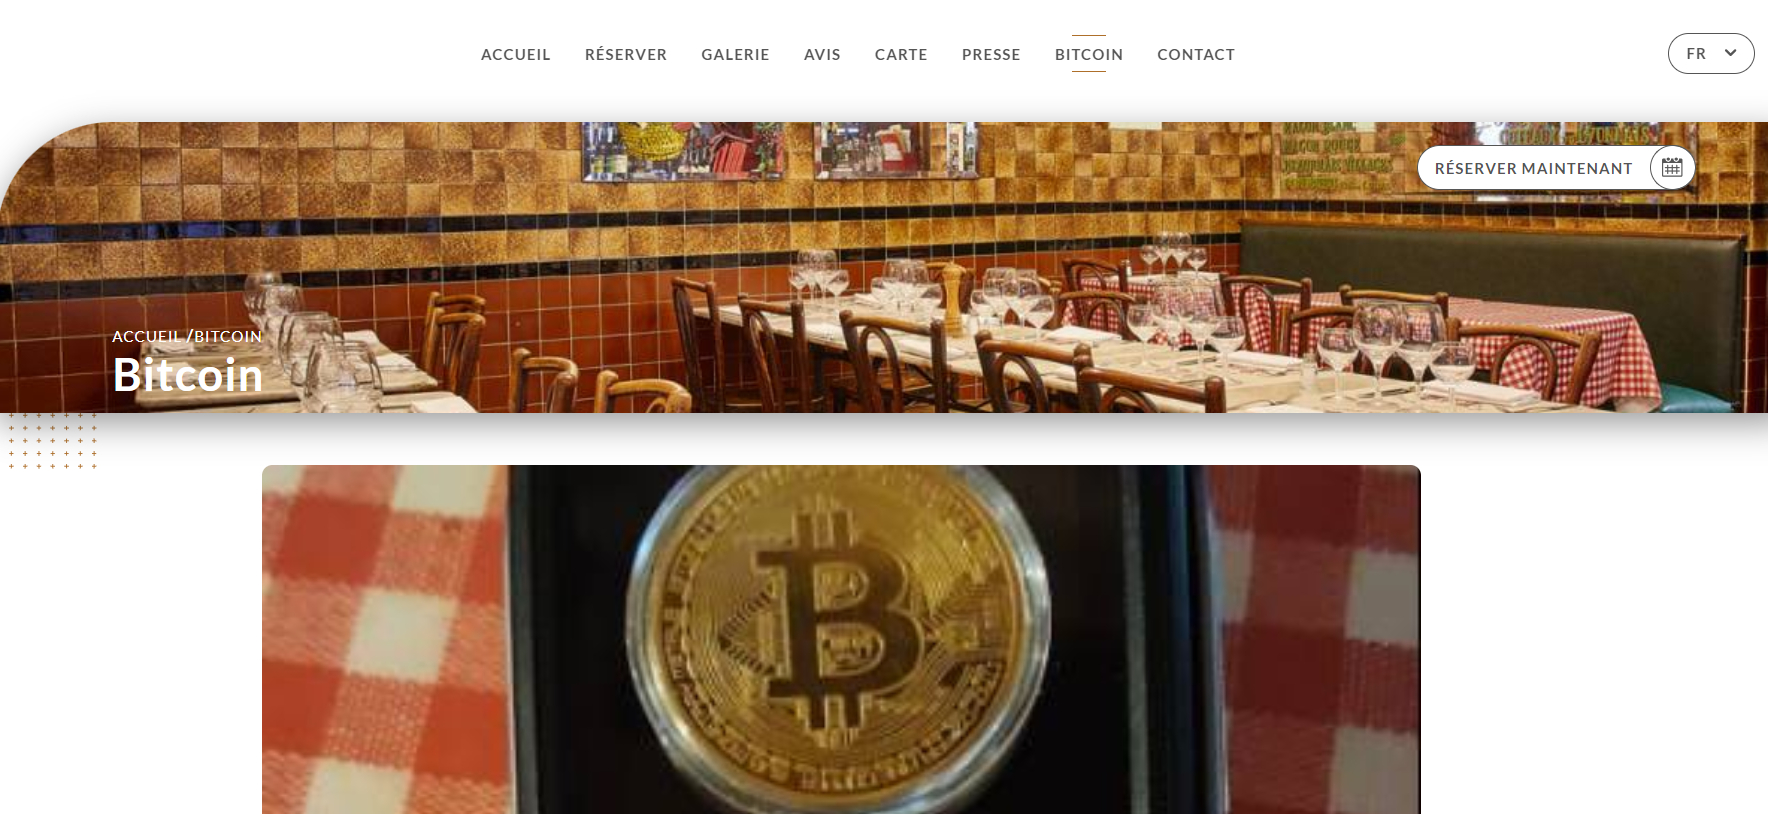 A page dedictaed to Bitcoin on a resturant&#039;s website.